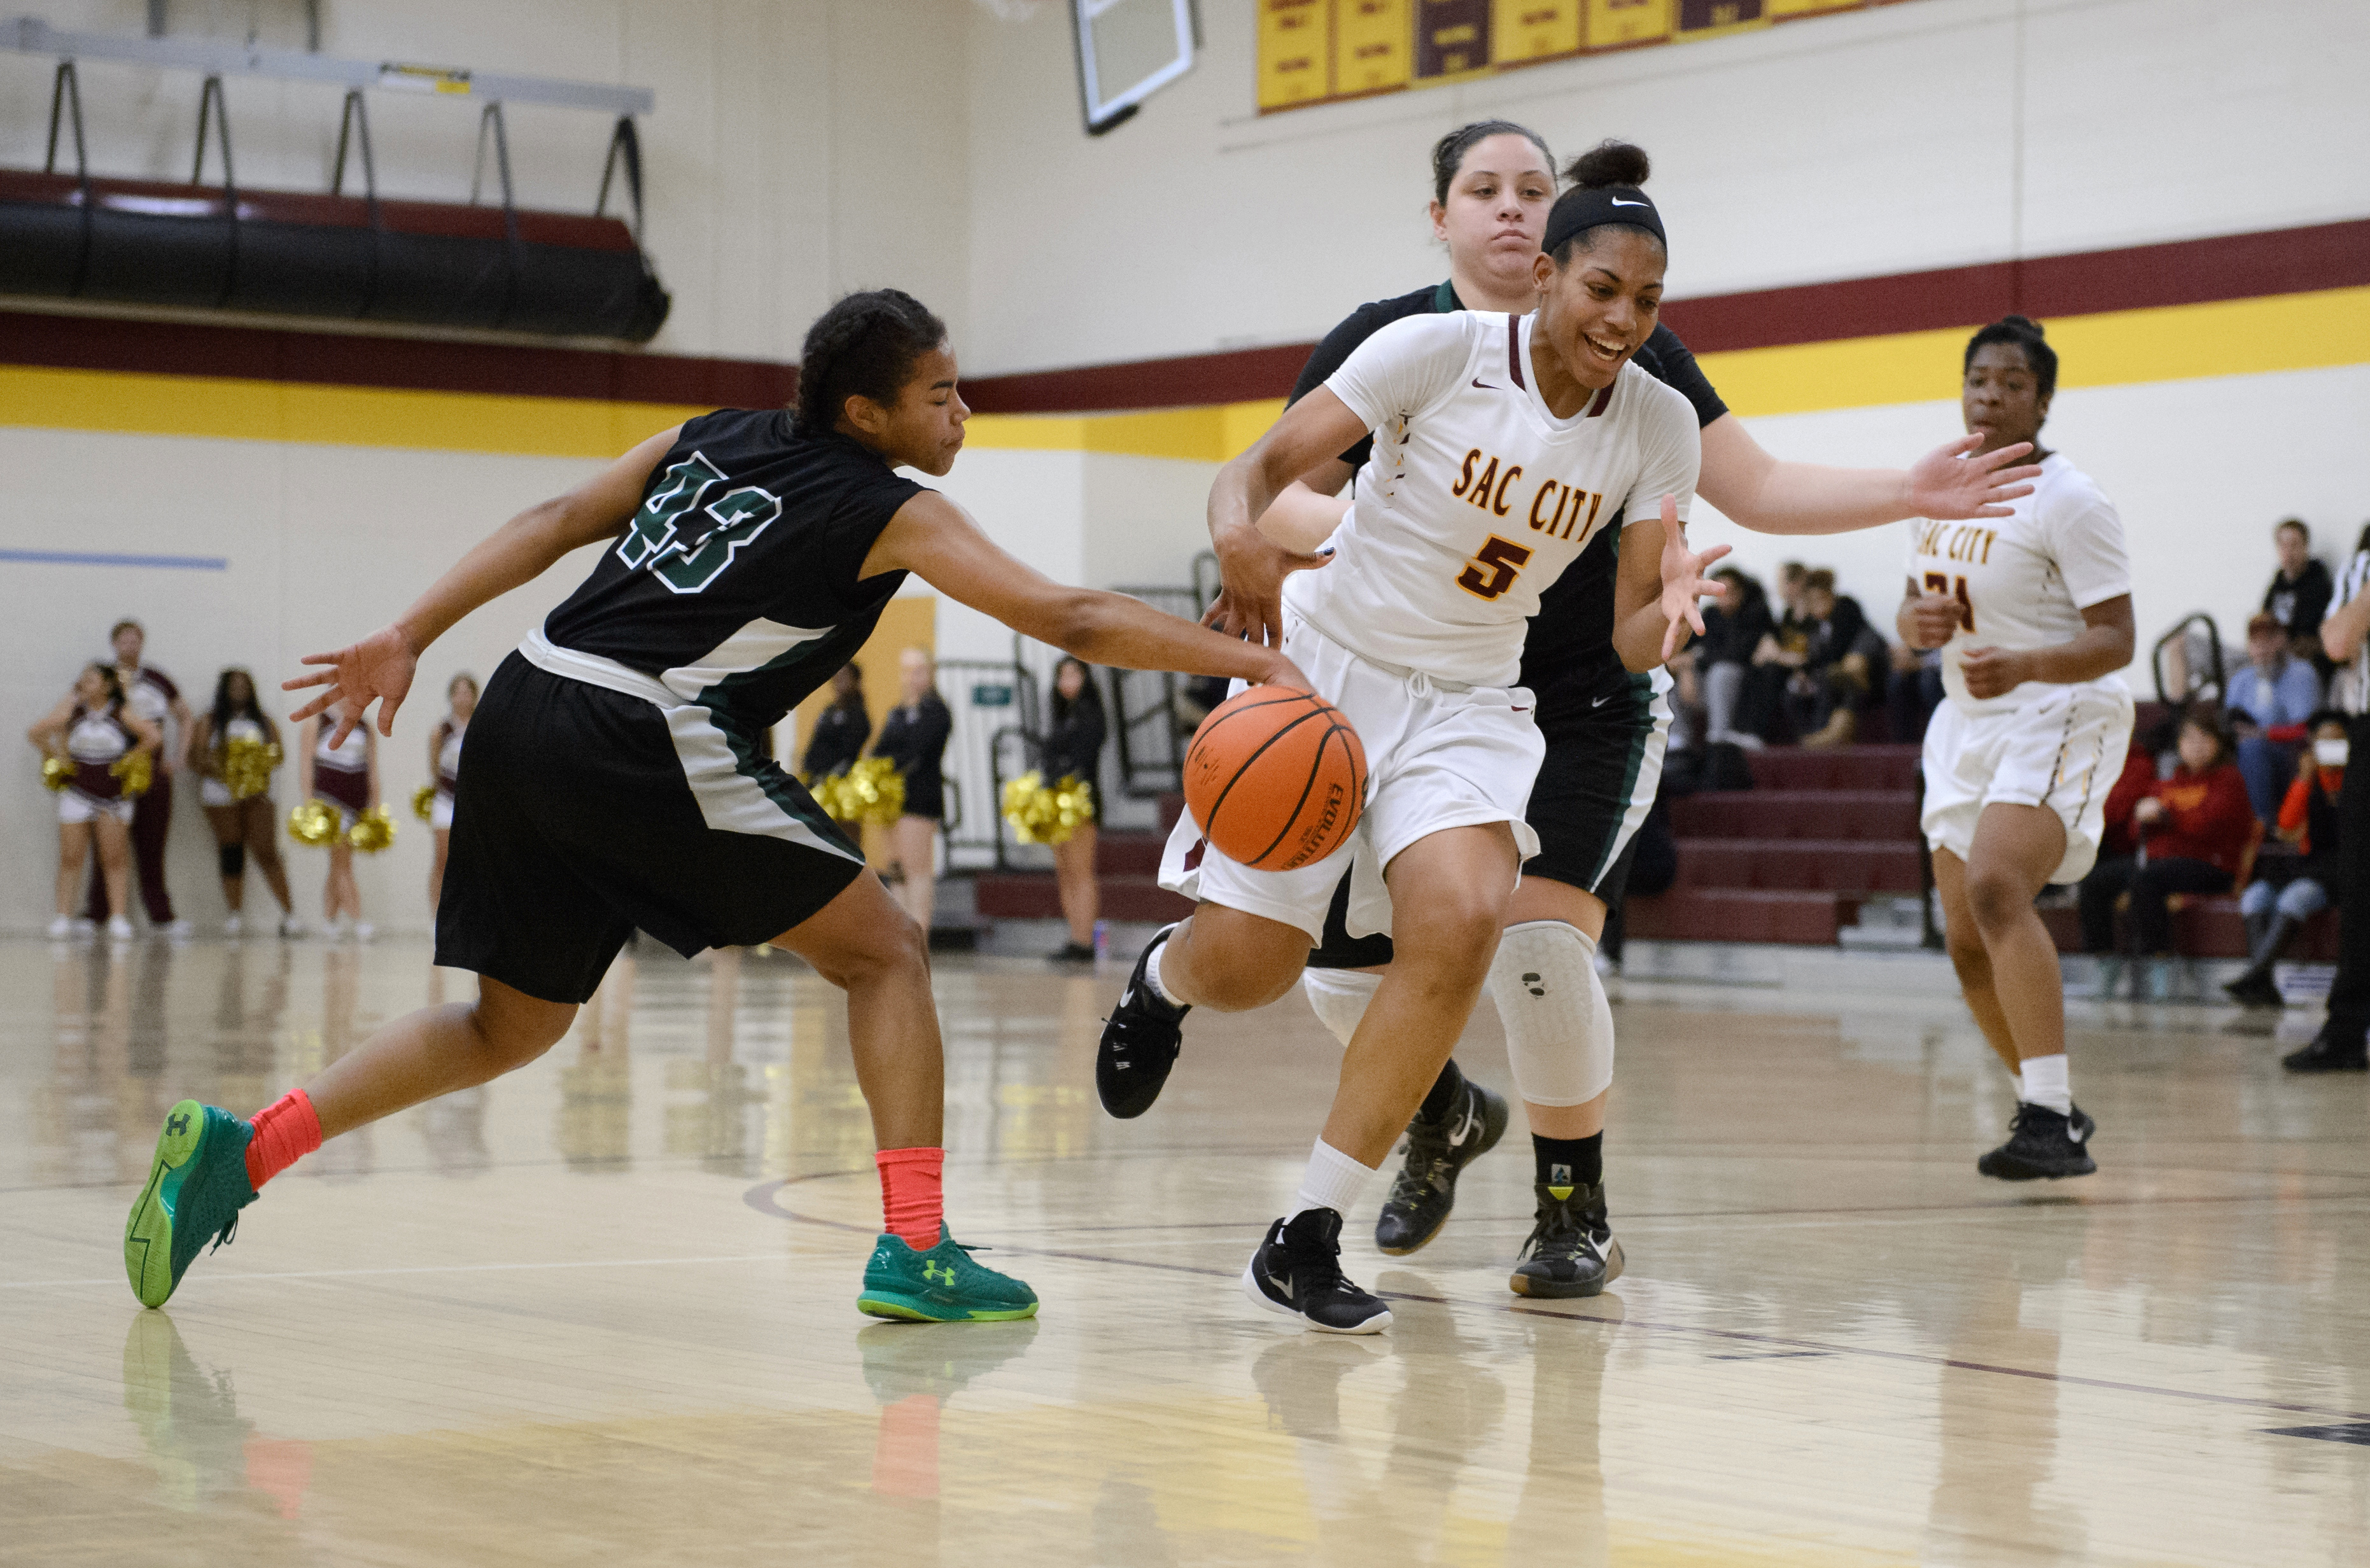 City College sophmore forward Erica Foster brings ball up court on Thursdays Feb. 11 game against Diablo Valley, the Panthers went on to win 67-58. Photo by Theresa Ratermann • Guest Photographer